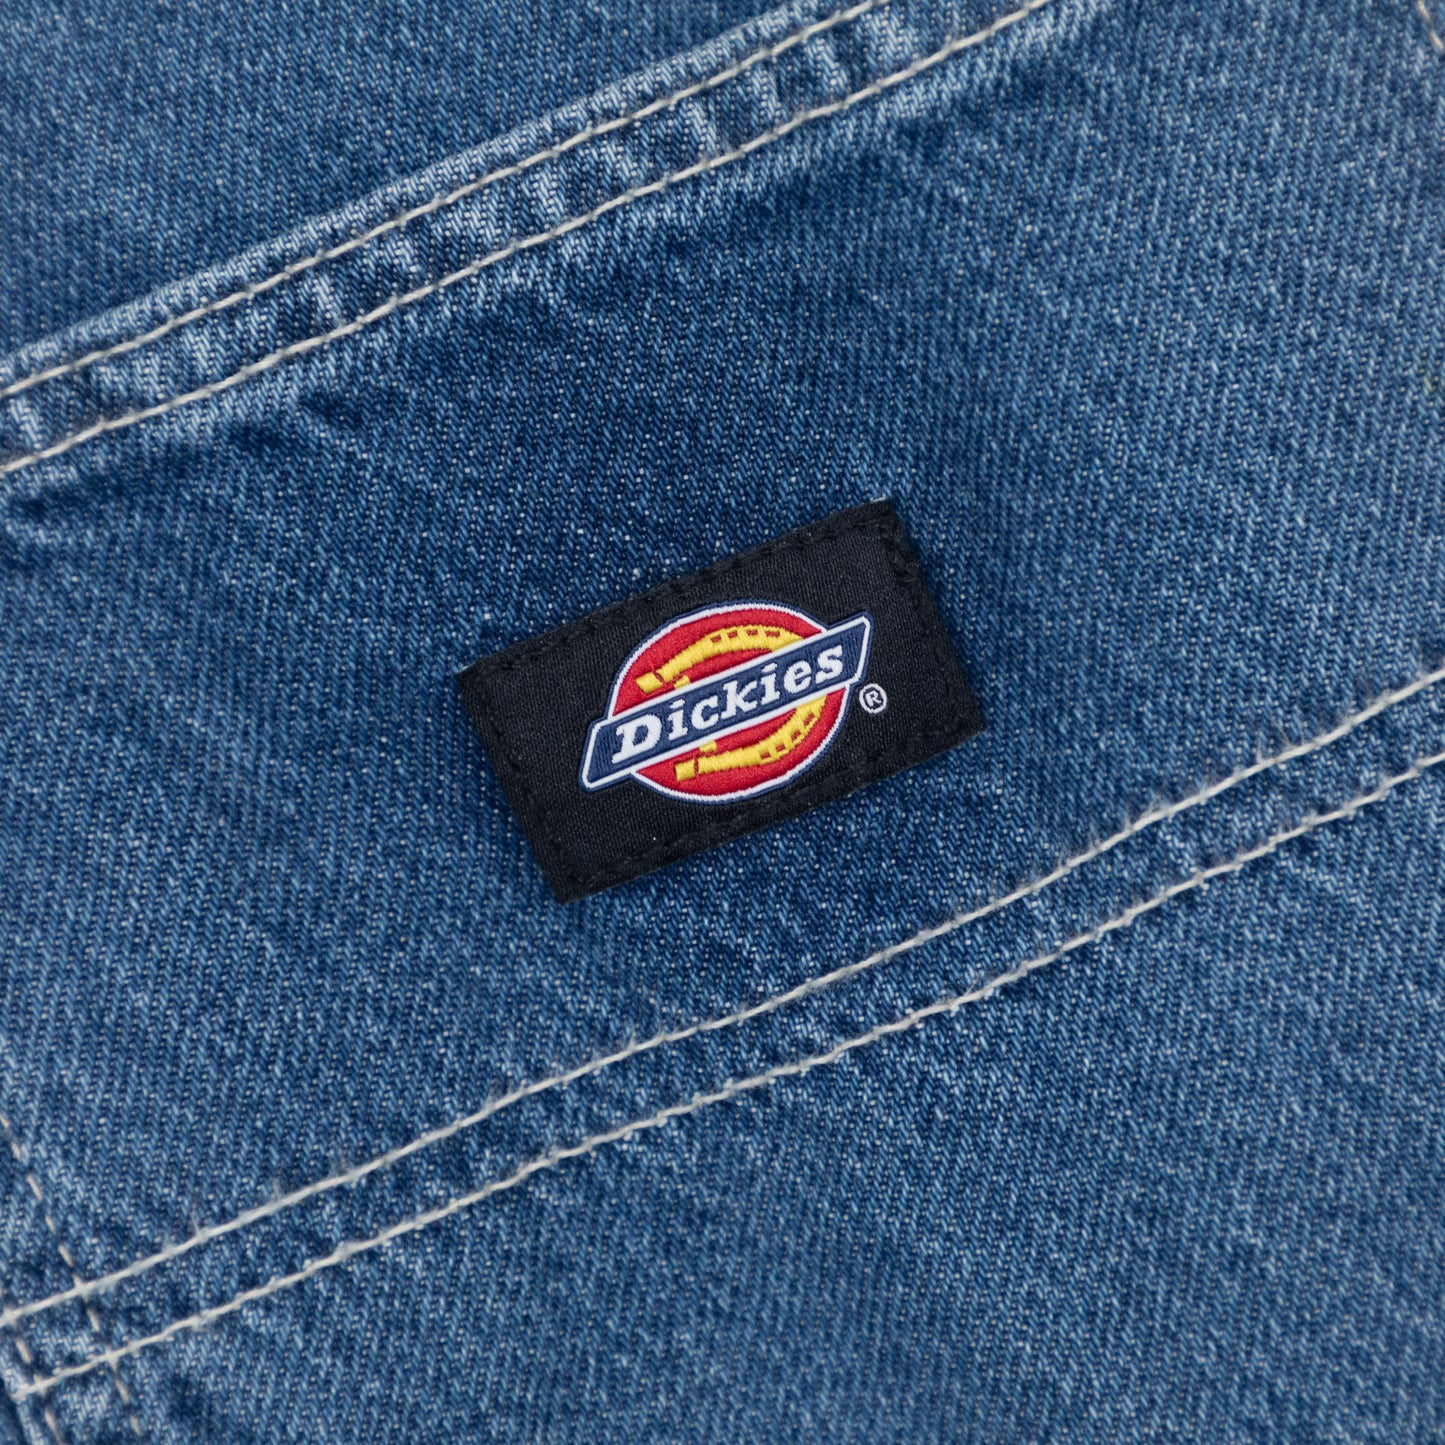 DICKIES Garyville Straight Fit Denim Pants in CLASSIC BLUE